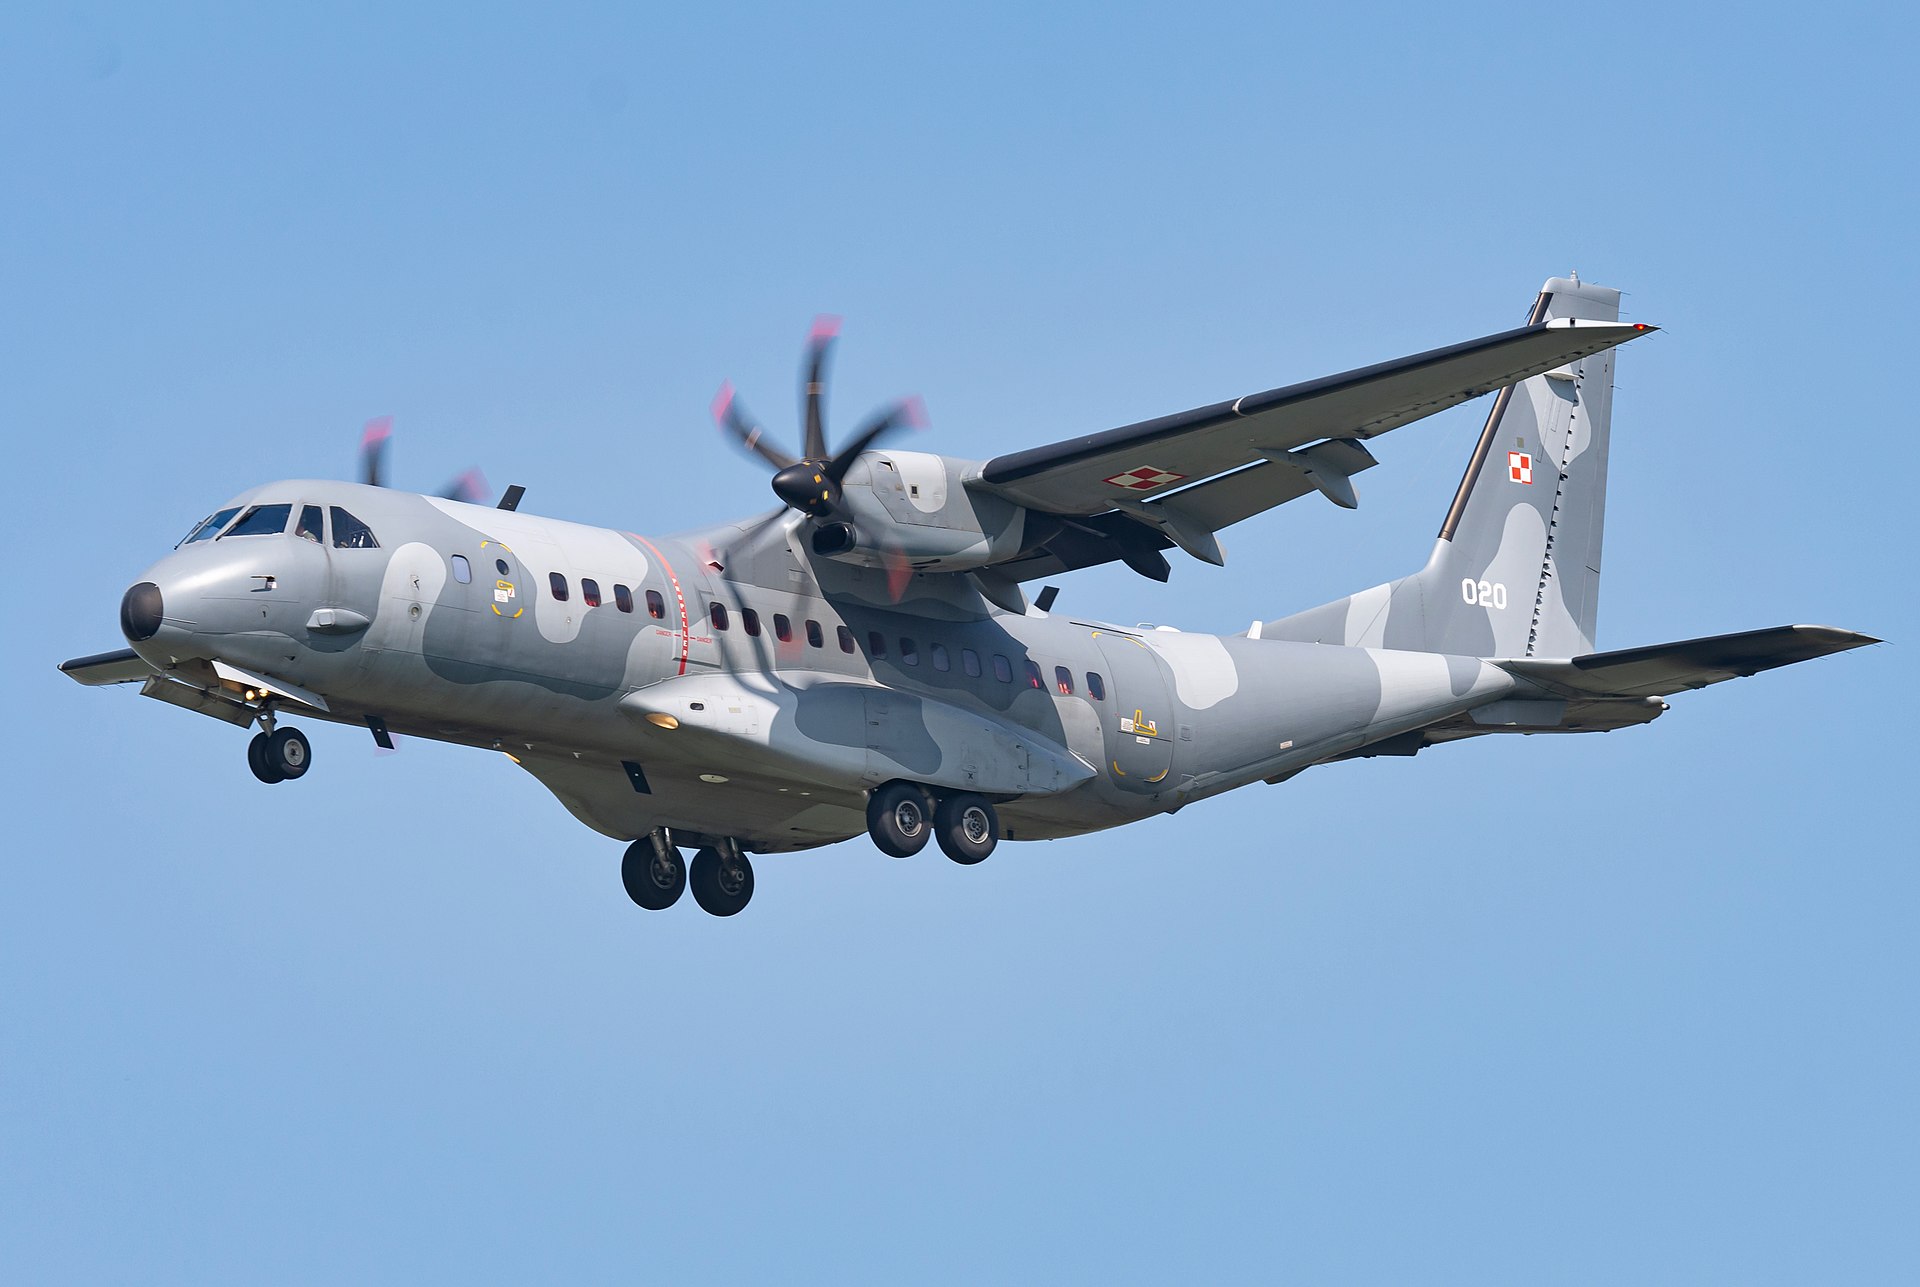 Indian Air Force Chief's Milestone Trip To Spain To Welcome First C-295 Transport Aircraft